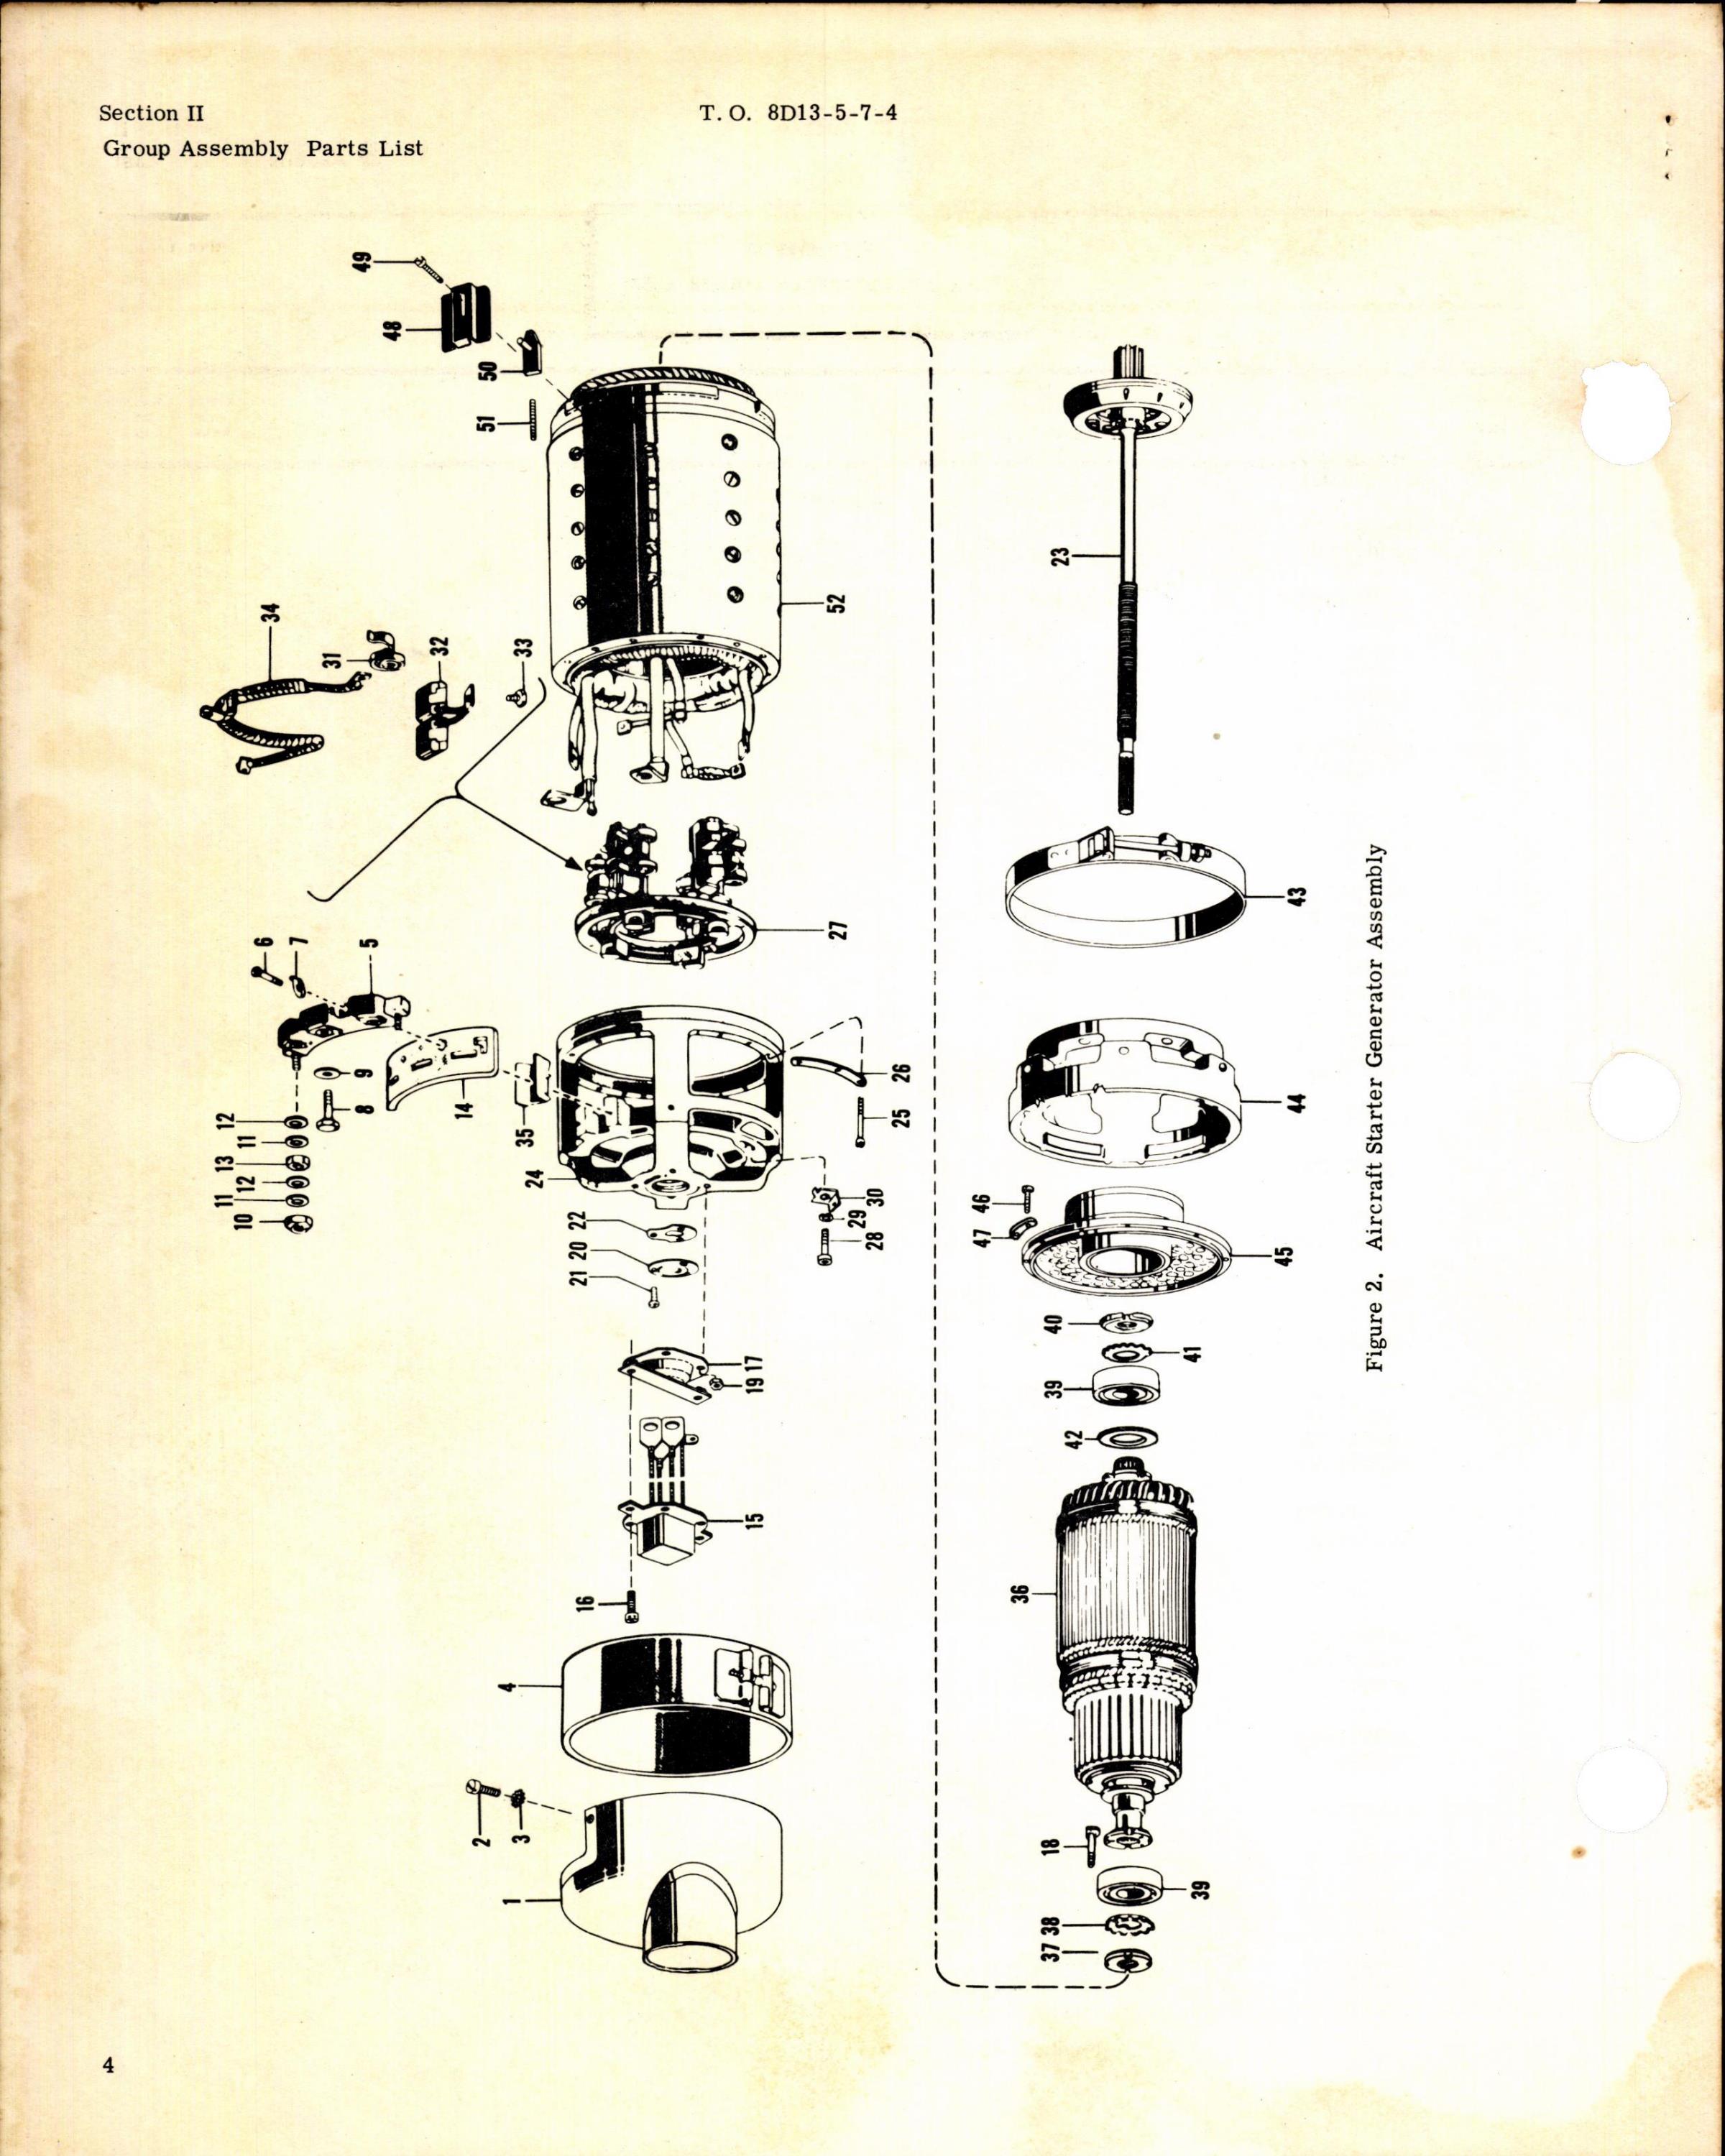 Sample page 4 from AirCorps Library document: Illustrated Parts Breakdown for Aircraft Starter Generator